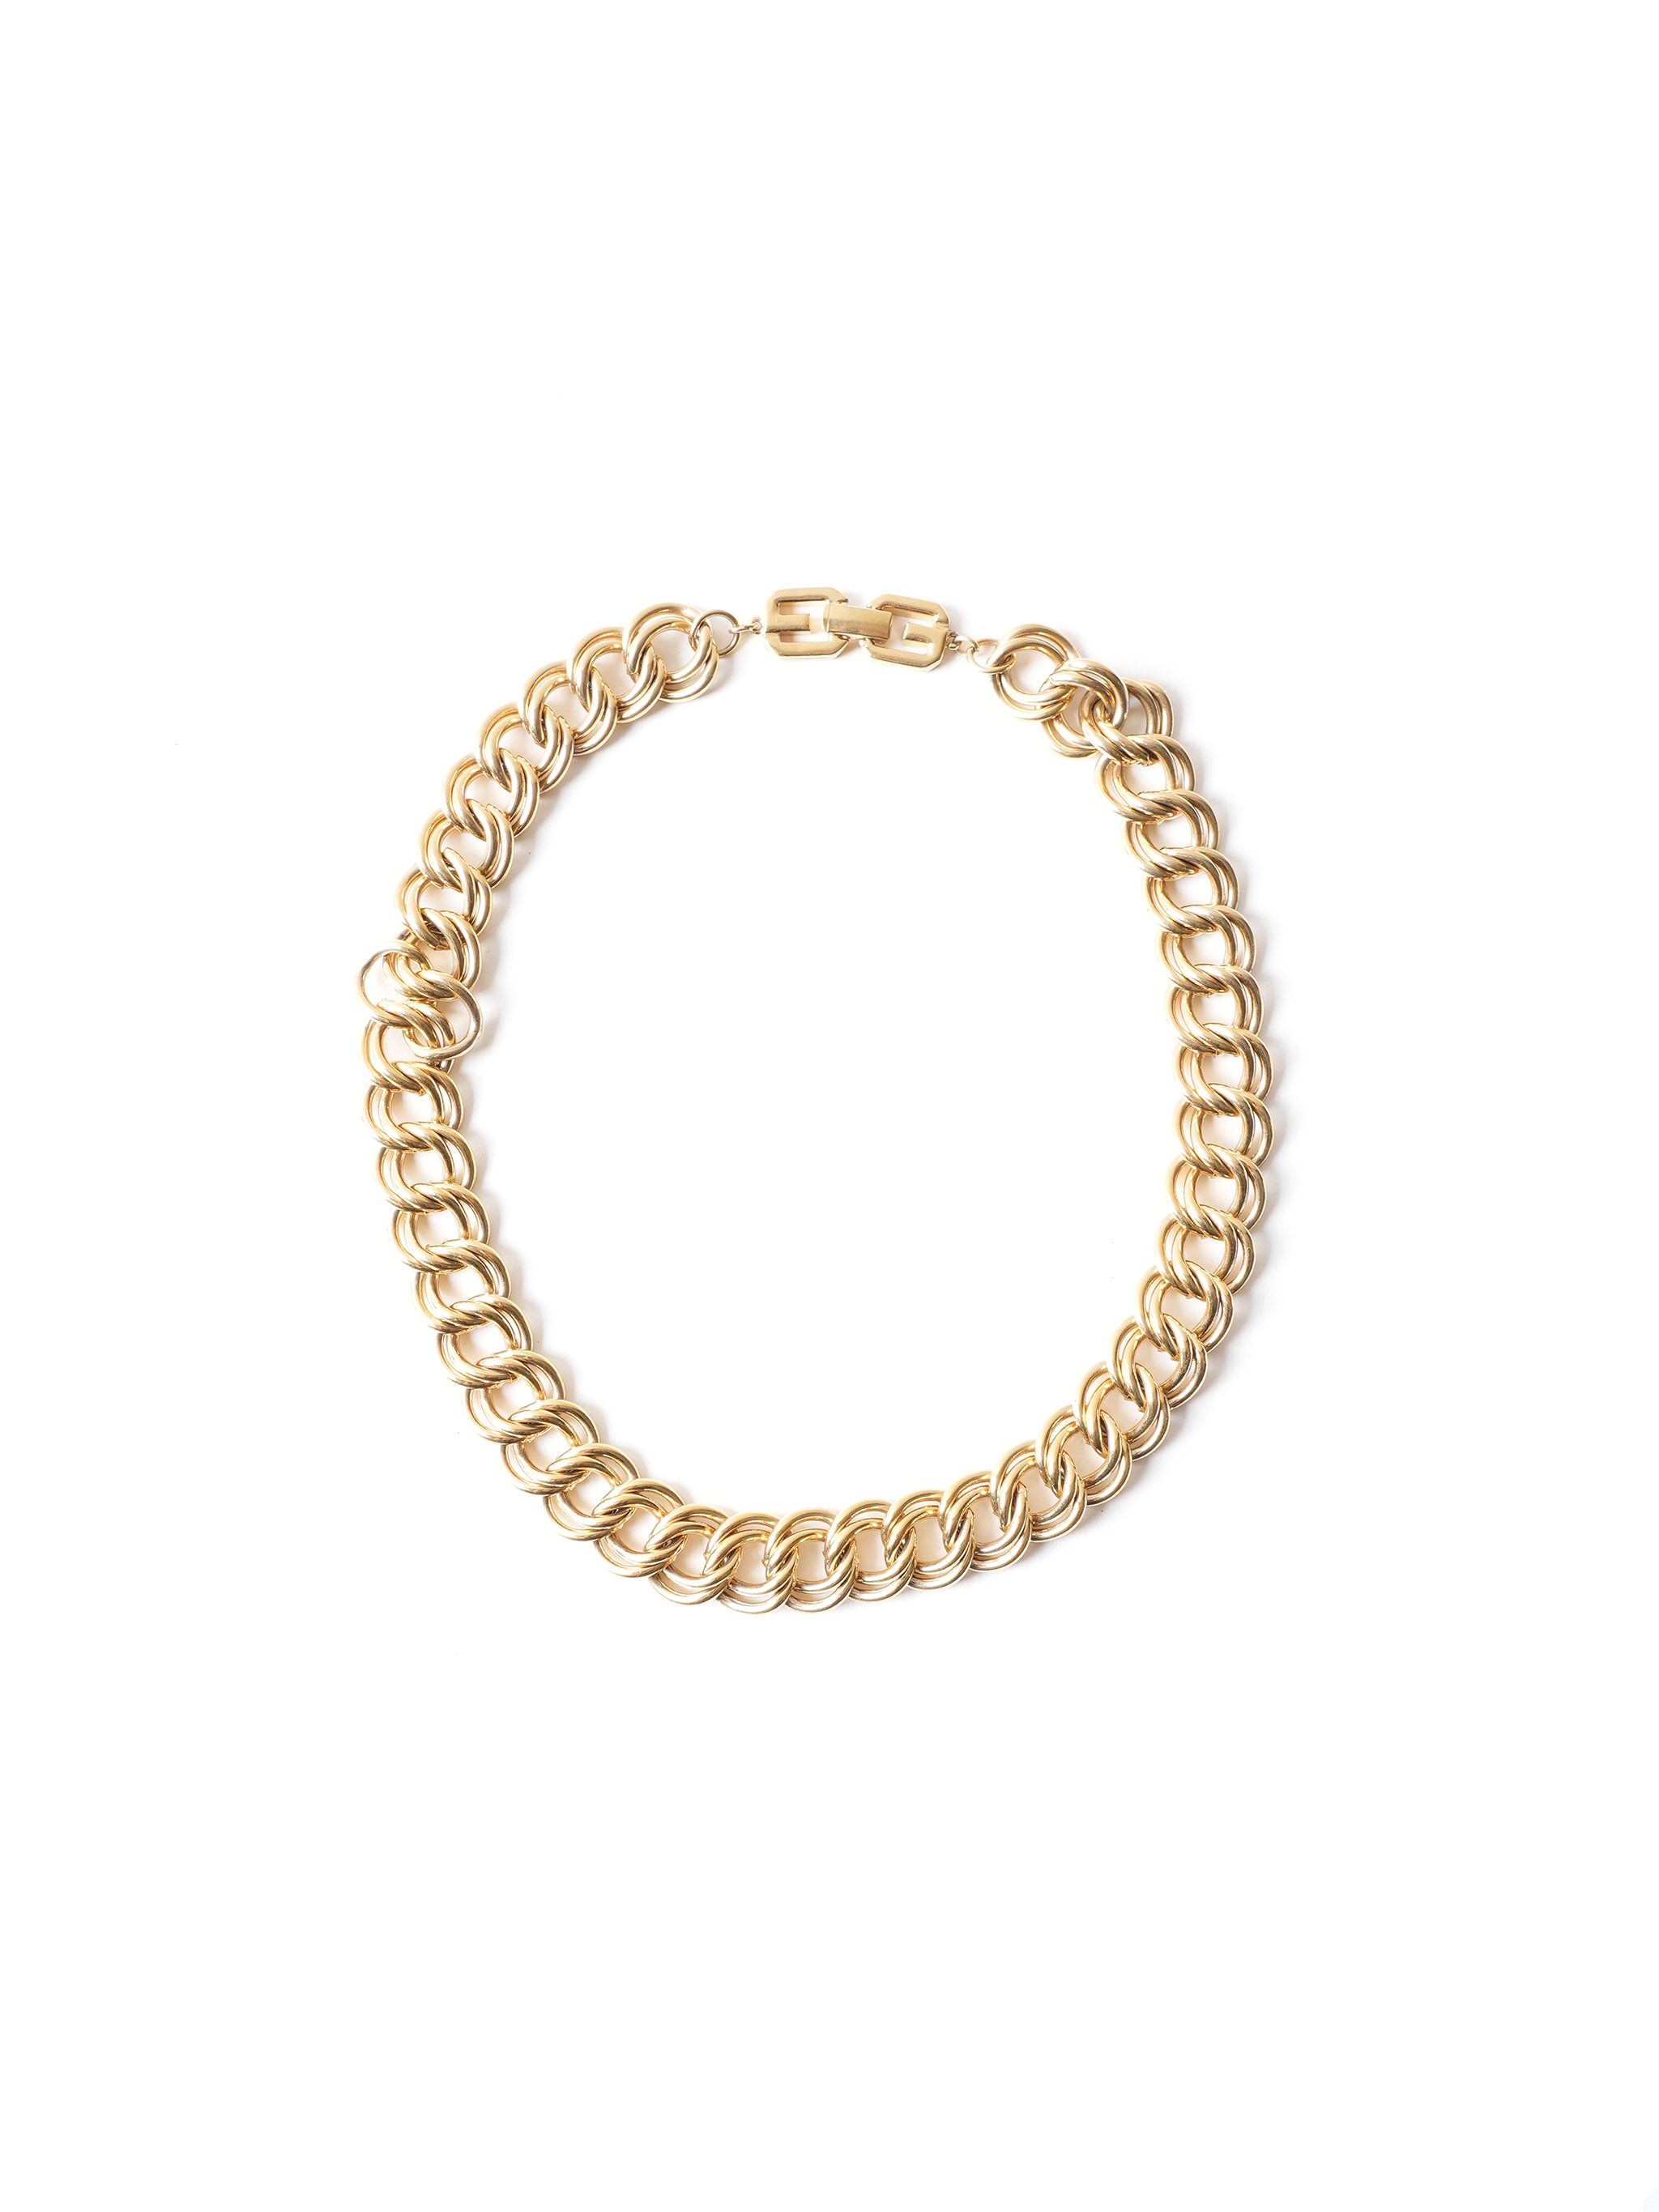 Vintage Givenchy Gold Pleated Necklace